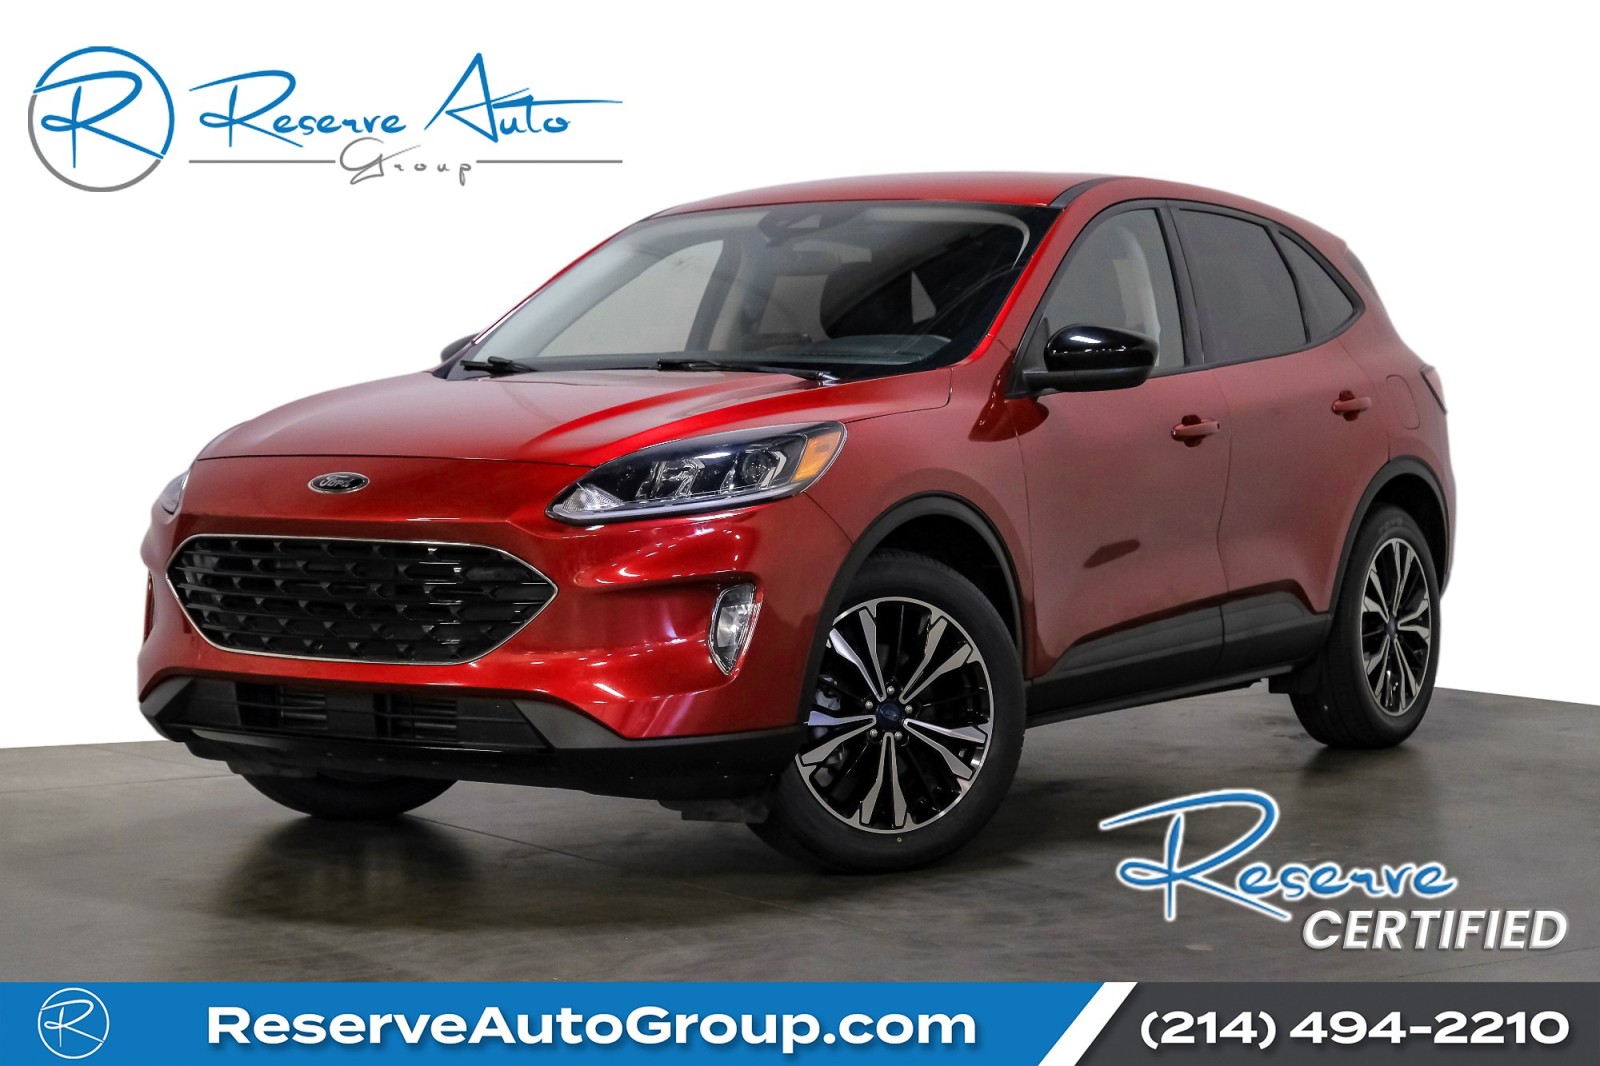 2022 Ford Escape SEL Stealth AWD B&OSound Co-Piot360 TowPkg 19Alloy 1